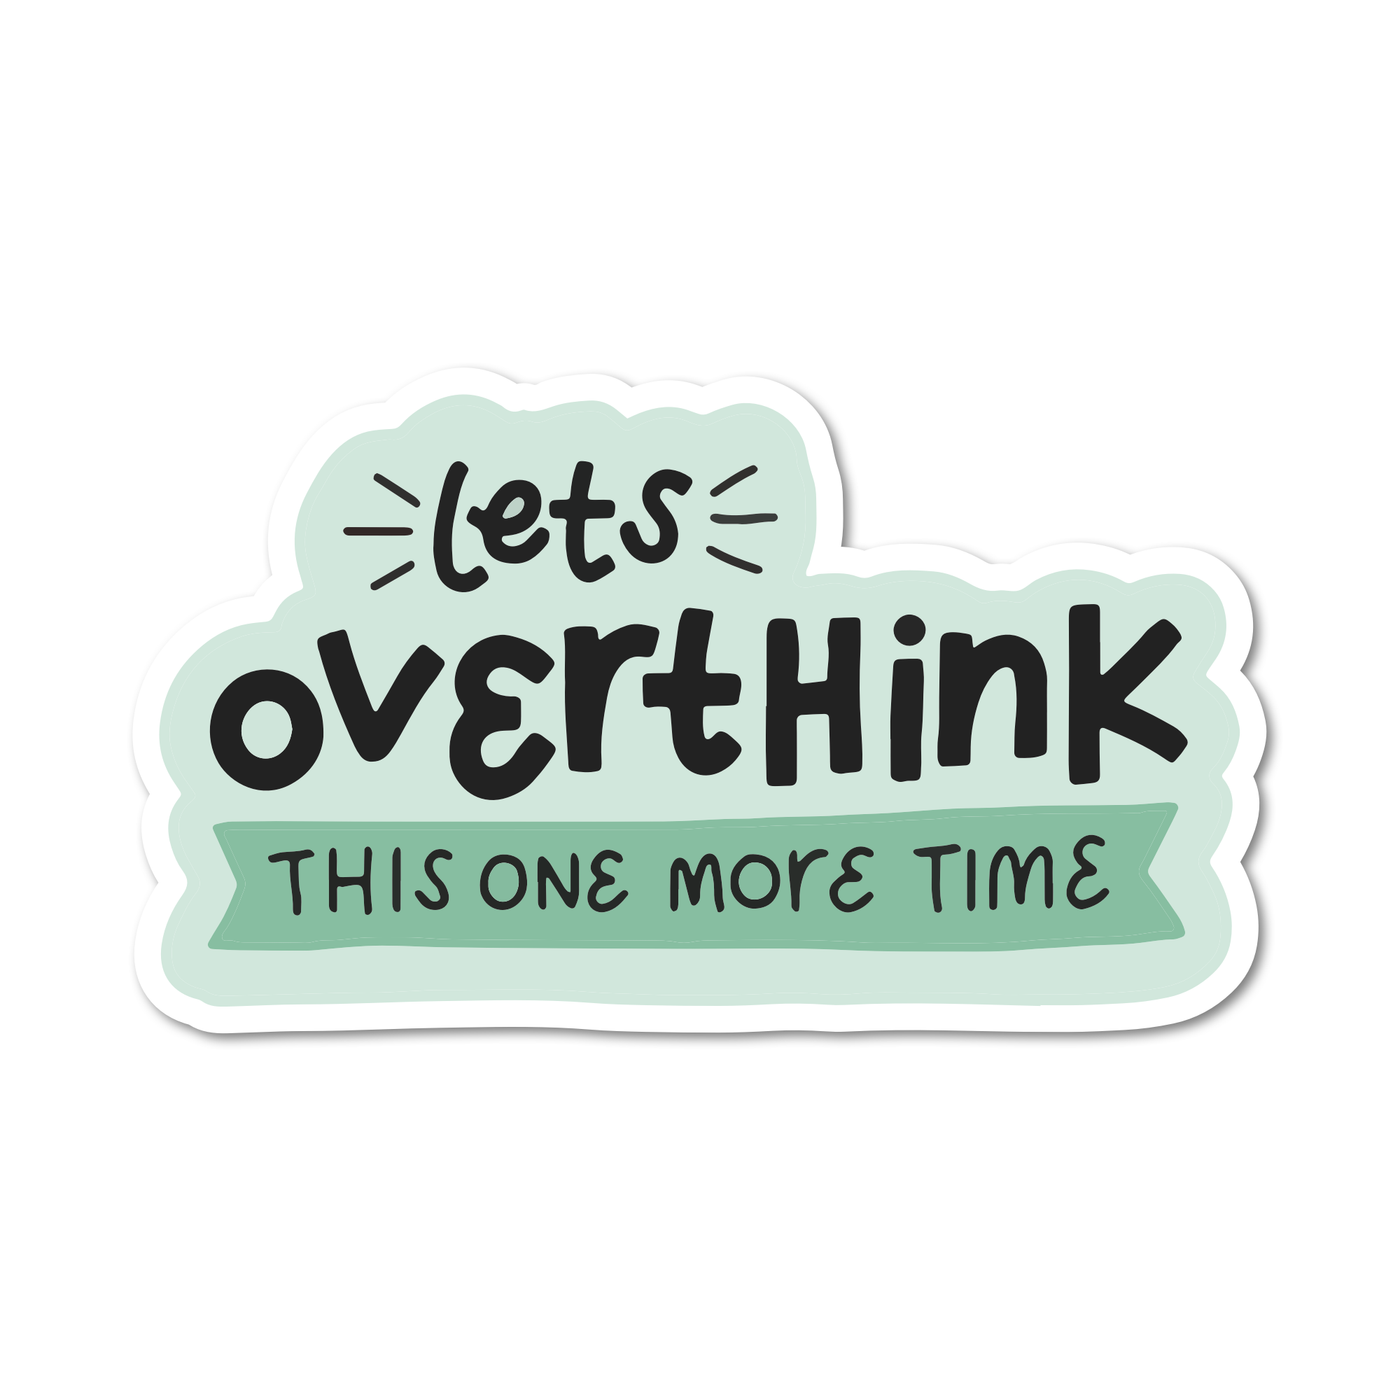 Mouthy Broad - Let's Overthink This One More Time: 3 inch / Vinyl Sticker